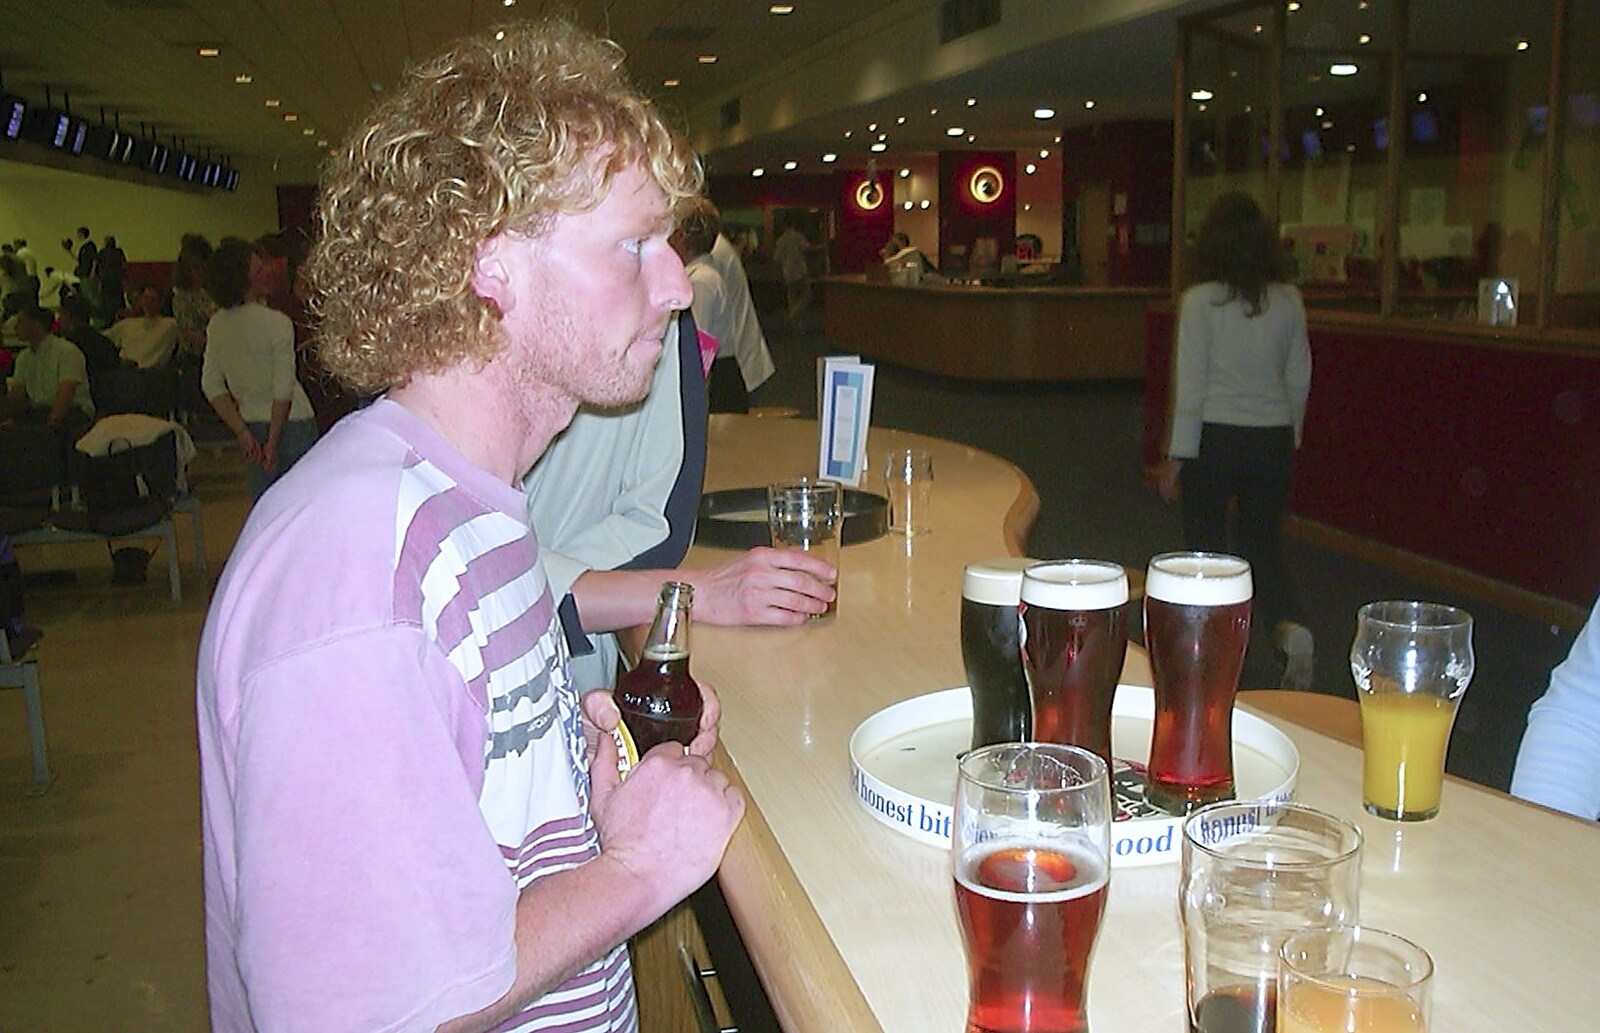 Wavy at the bar from Ten Pin Bowling, Norwich, Norfolk - 13th September 2003